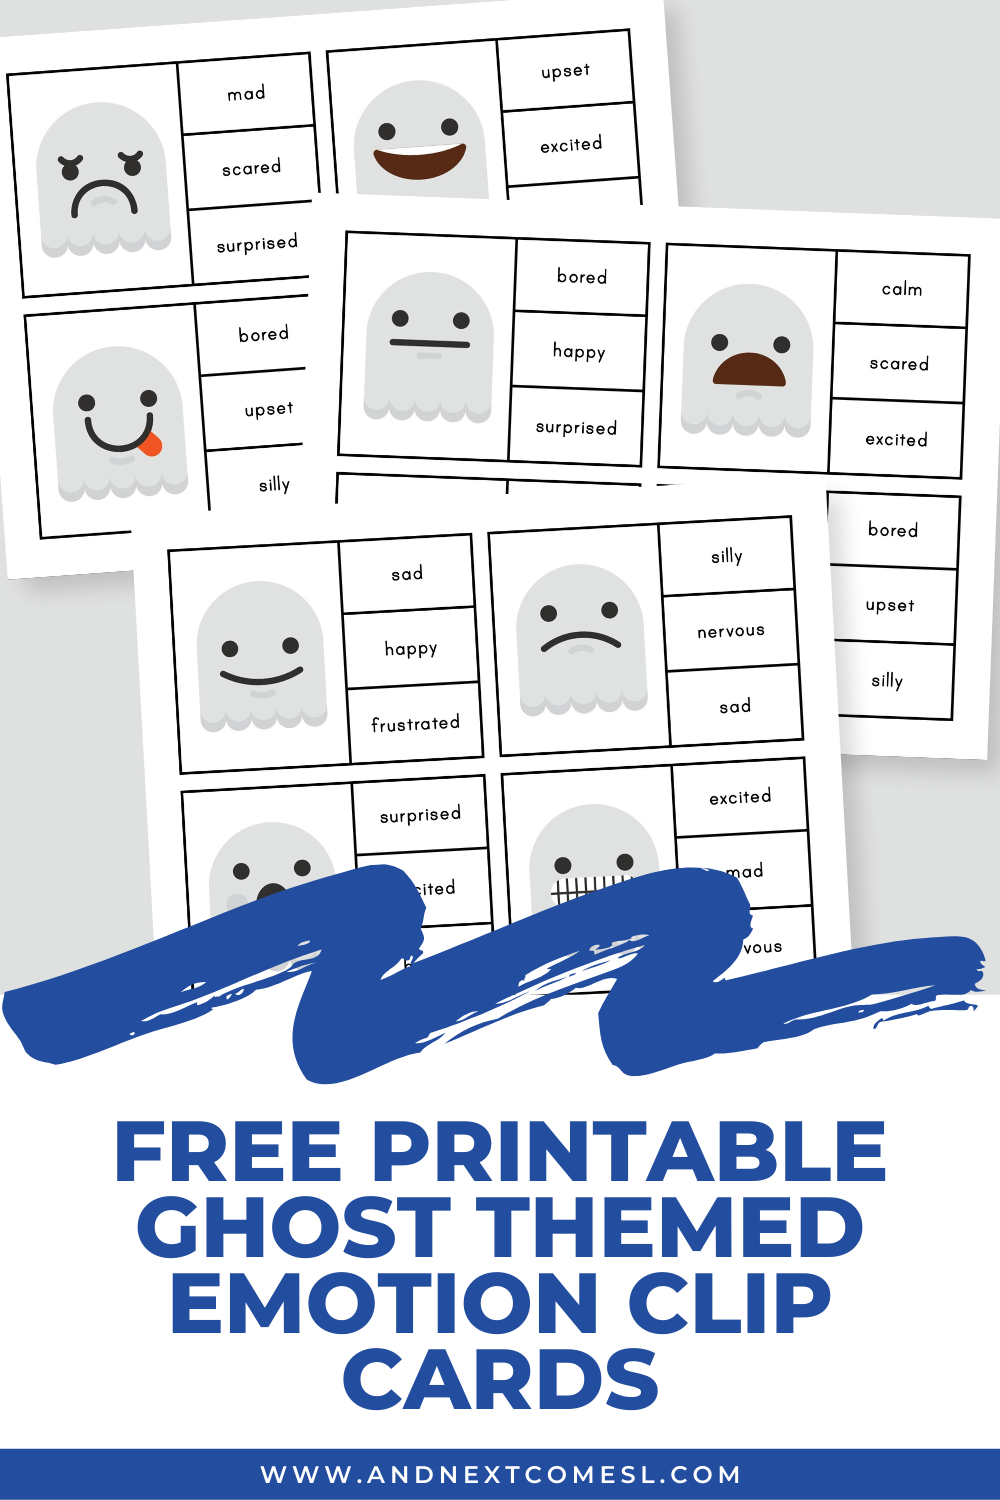 Free printable ghost themed emotion clip cards for kids - a great fine motor and emotions activity for Halloween!